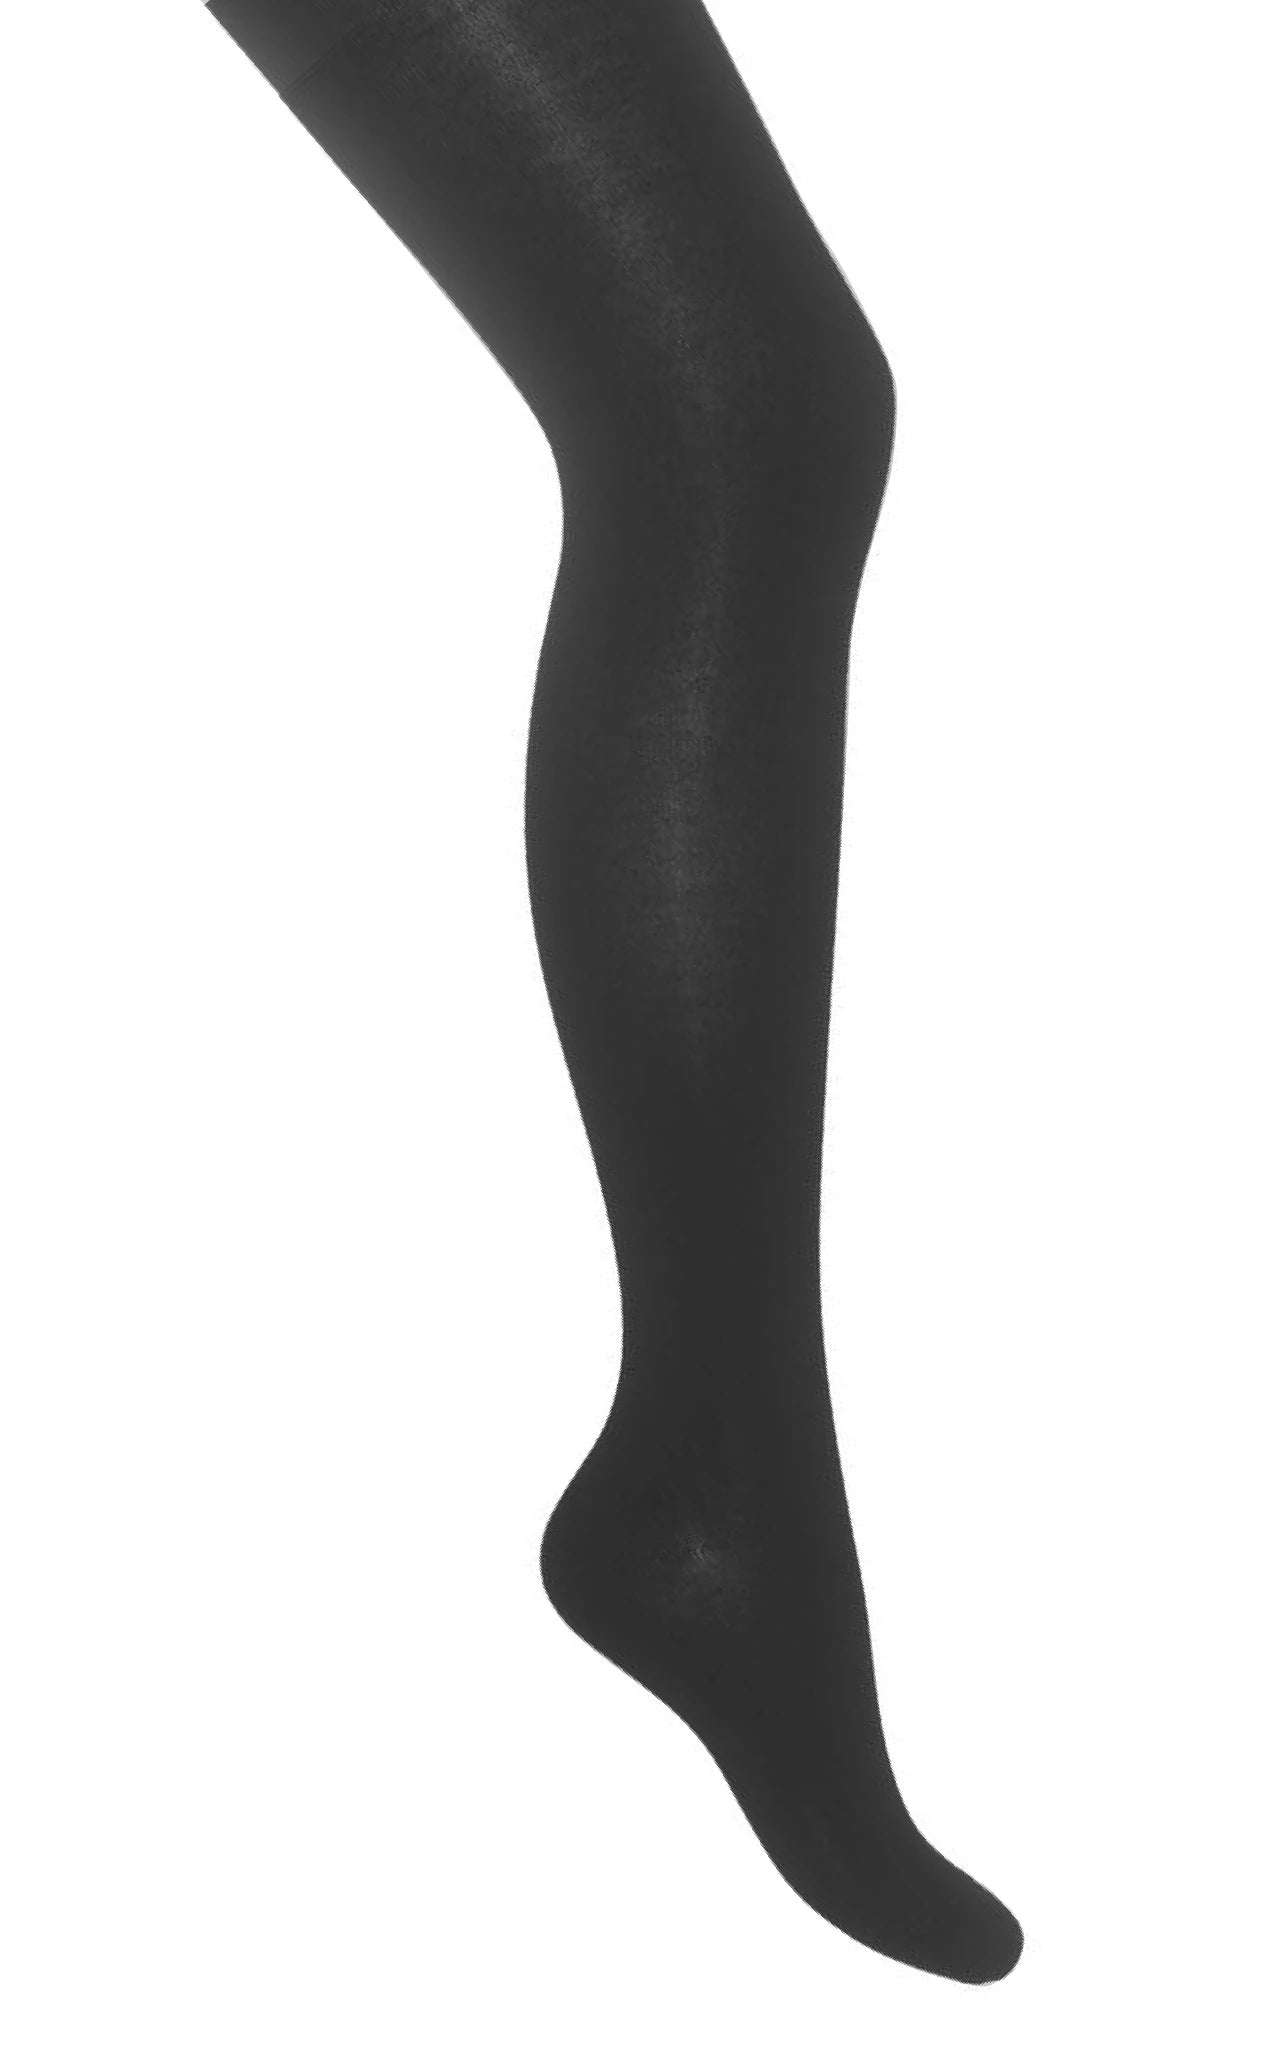 Bonnie Doon Cotton Tights - black knitted Winter thermal warm tights